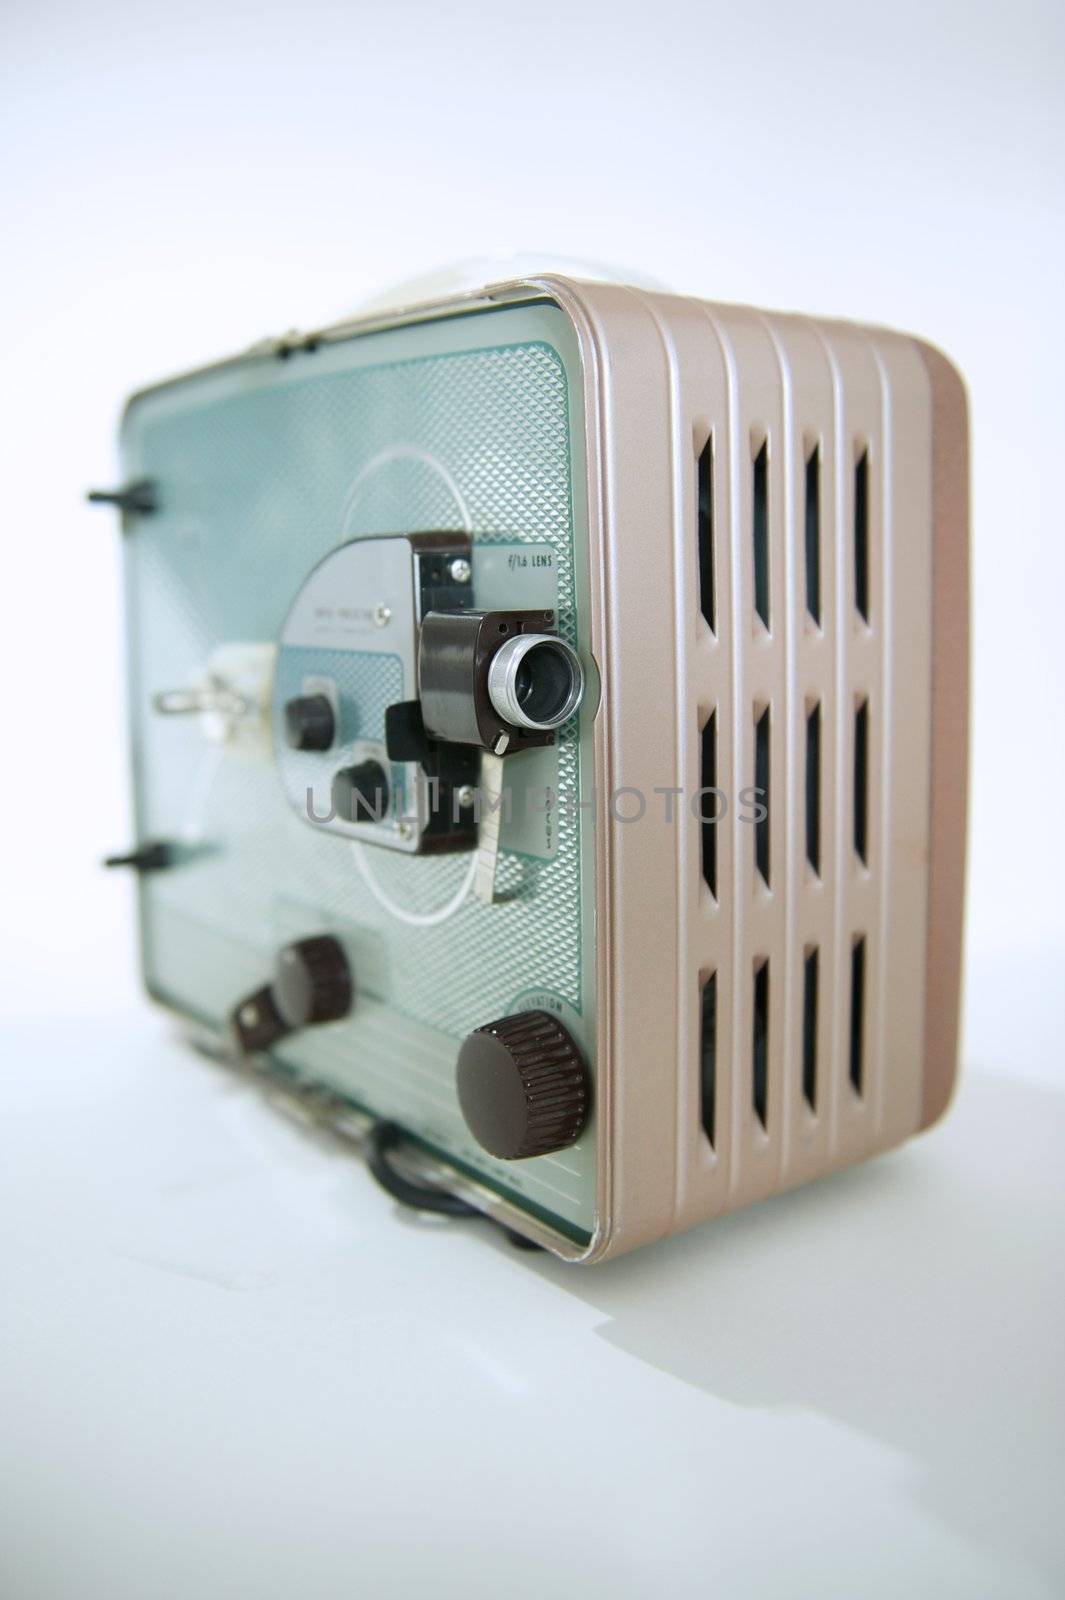 Vintage 8mm Home Movie Projector with Shallow DOF by pixelsnap